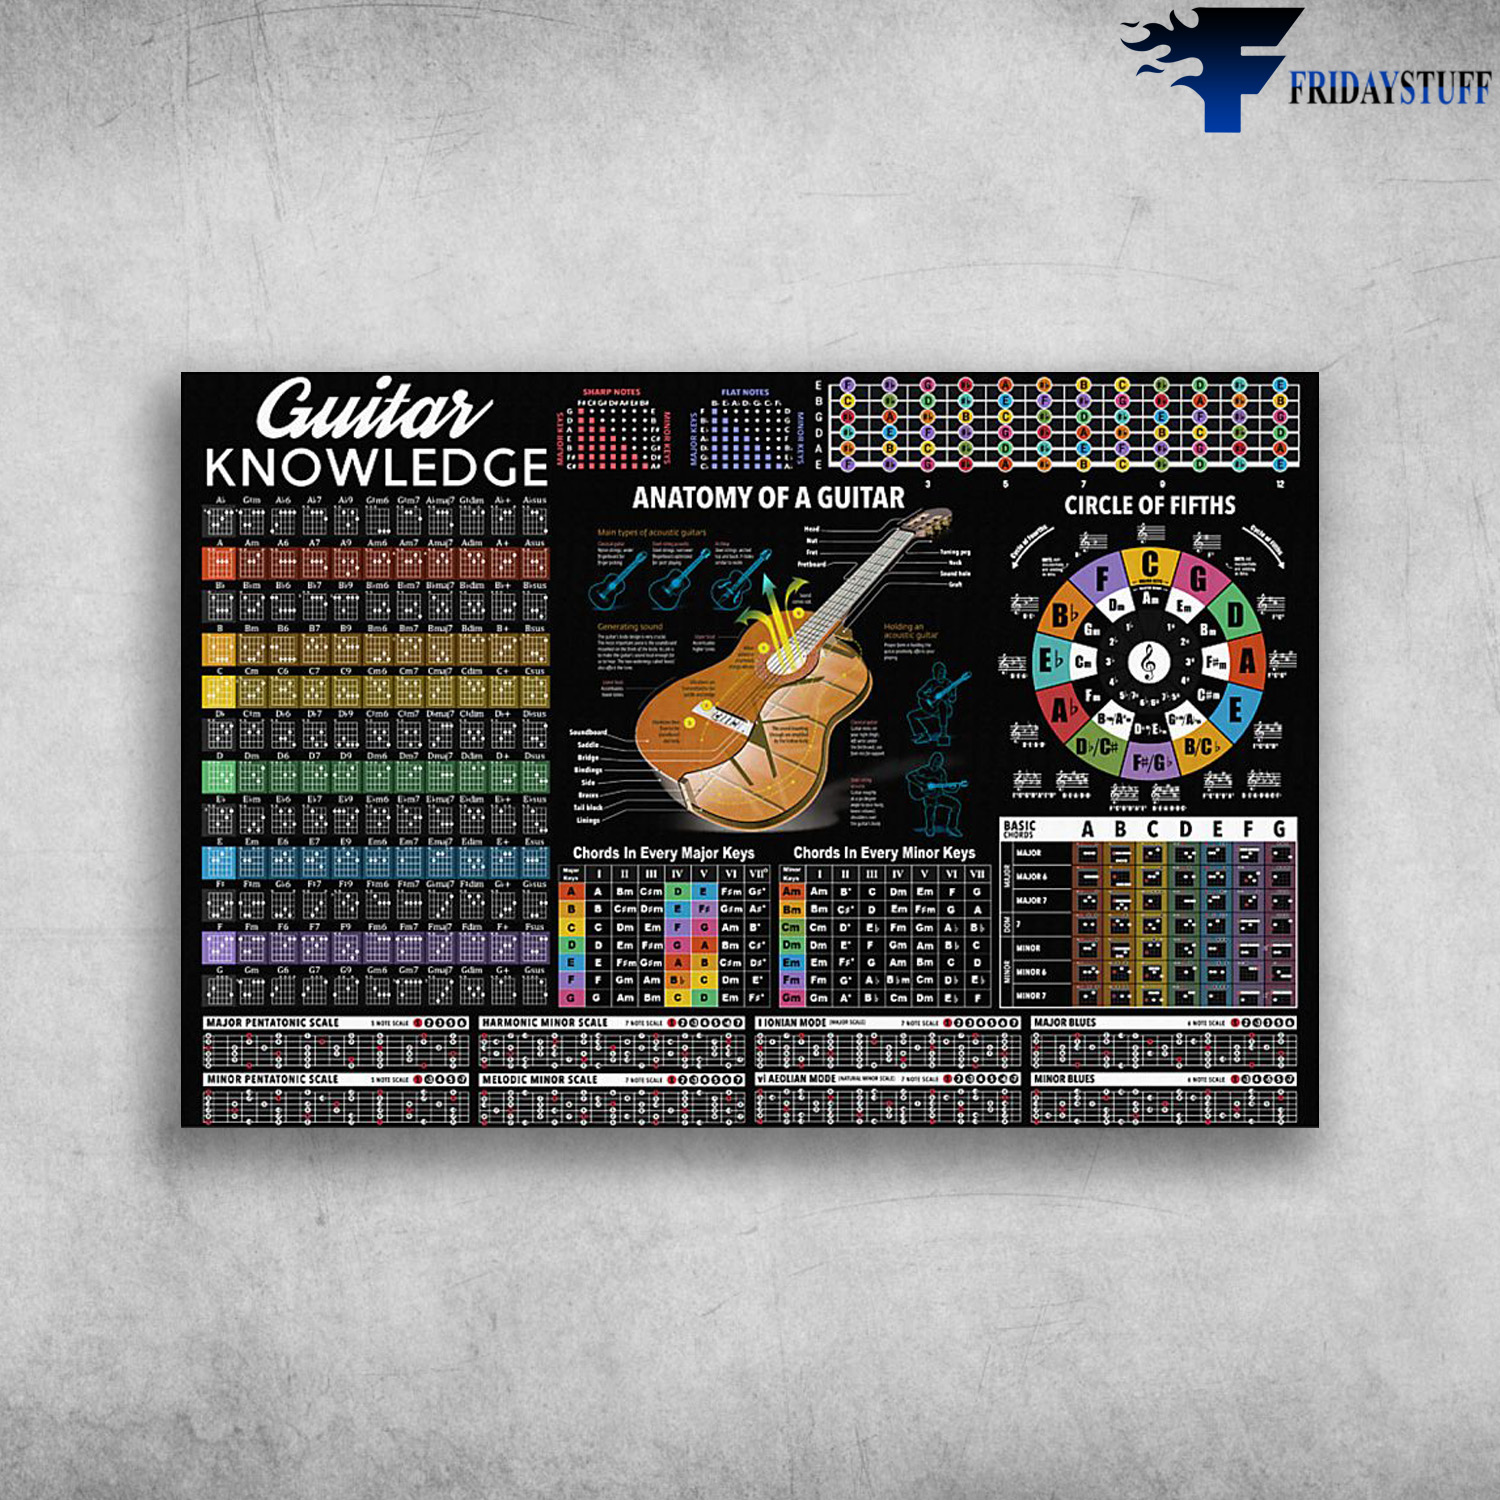 Guitar Knowledge - Anatomy Of A Guitar, Circle Of Fifths, Chords In Every Major Keys, Chords In Every Minor Keys